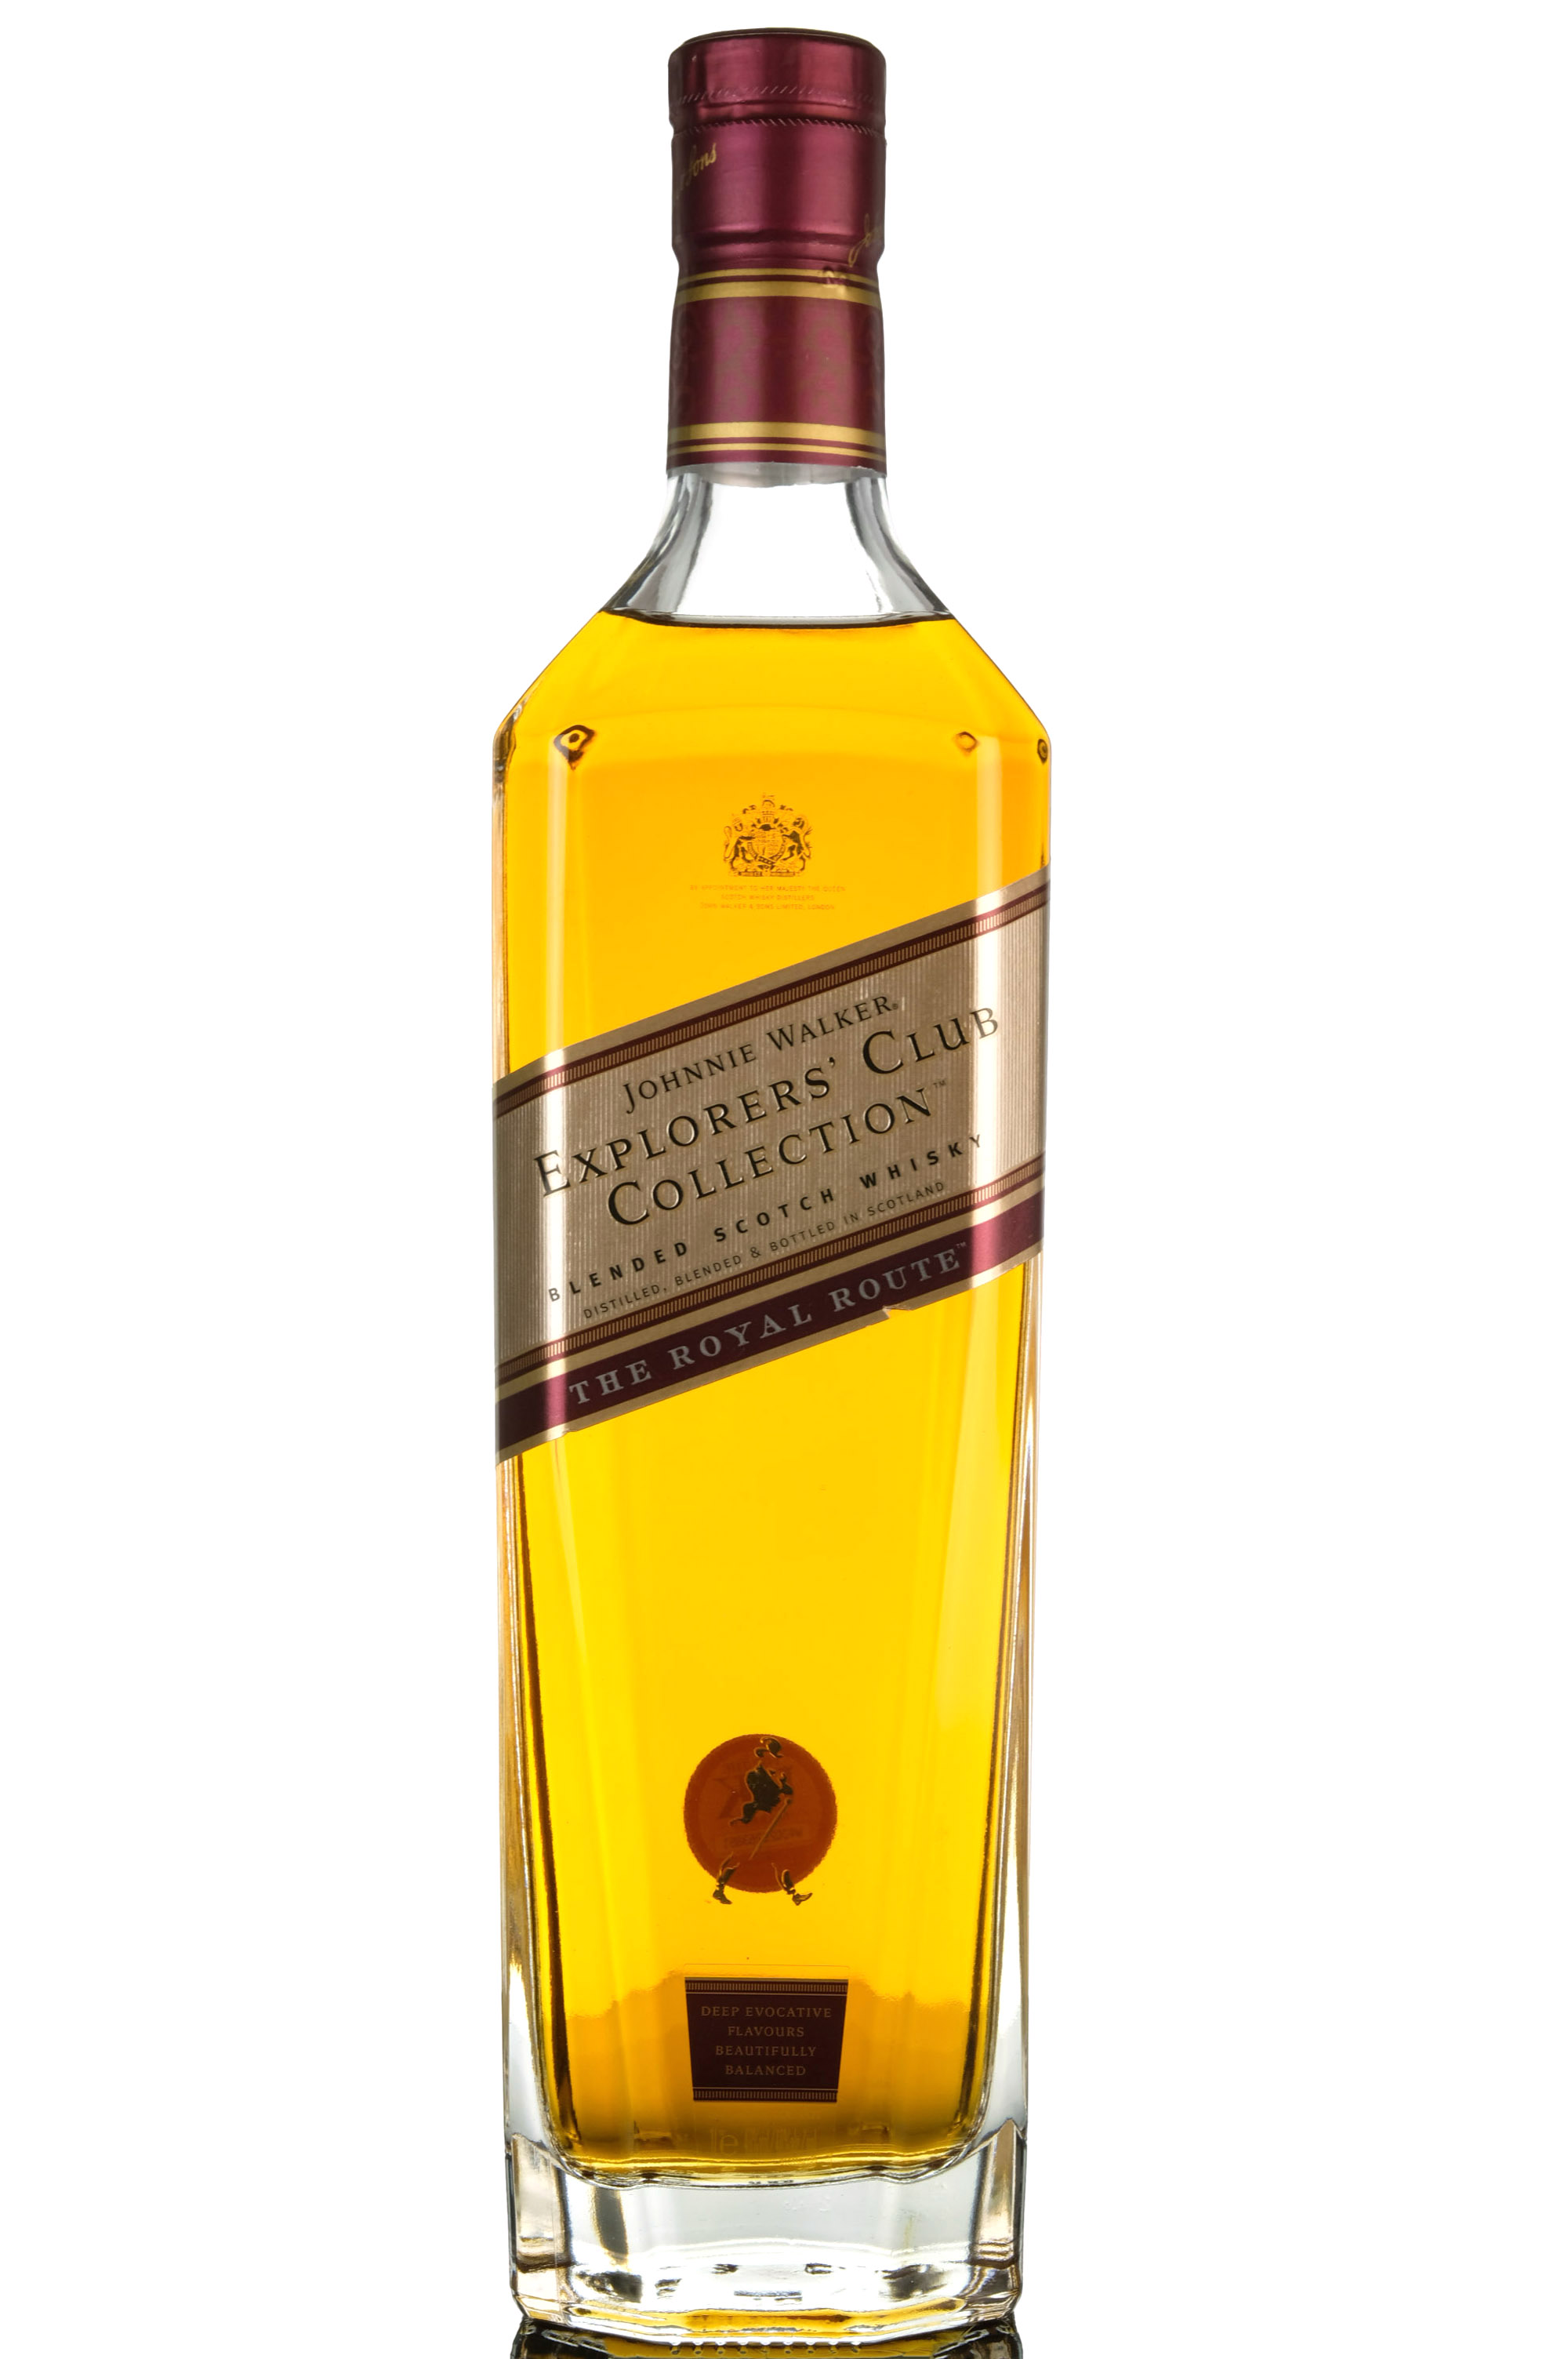 Johnnie Walker Explorers Club Collection - The Royal Route - 1 Litre